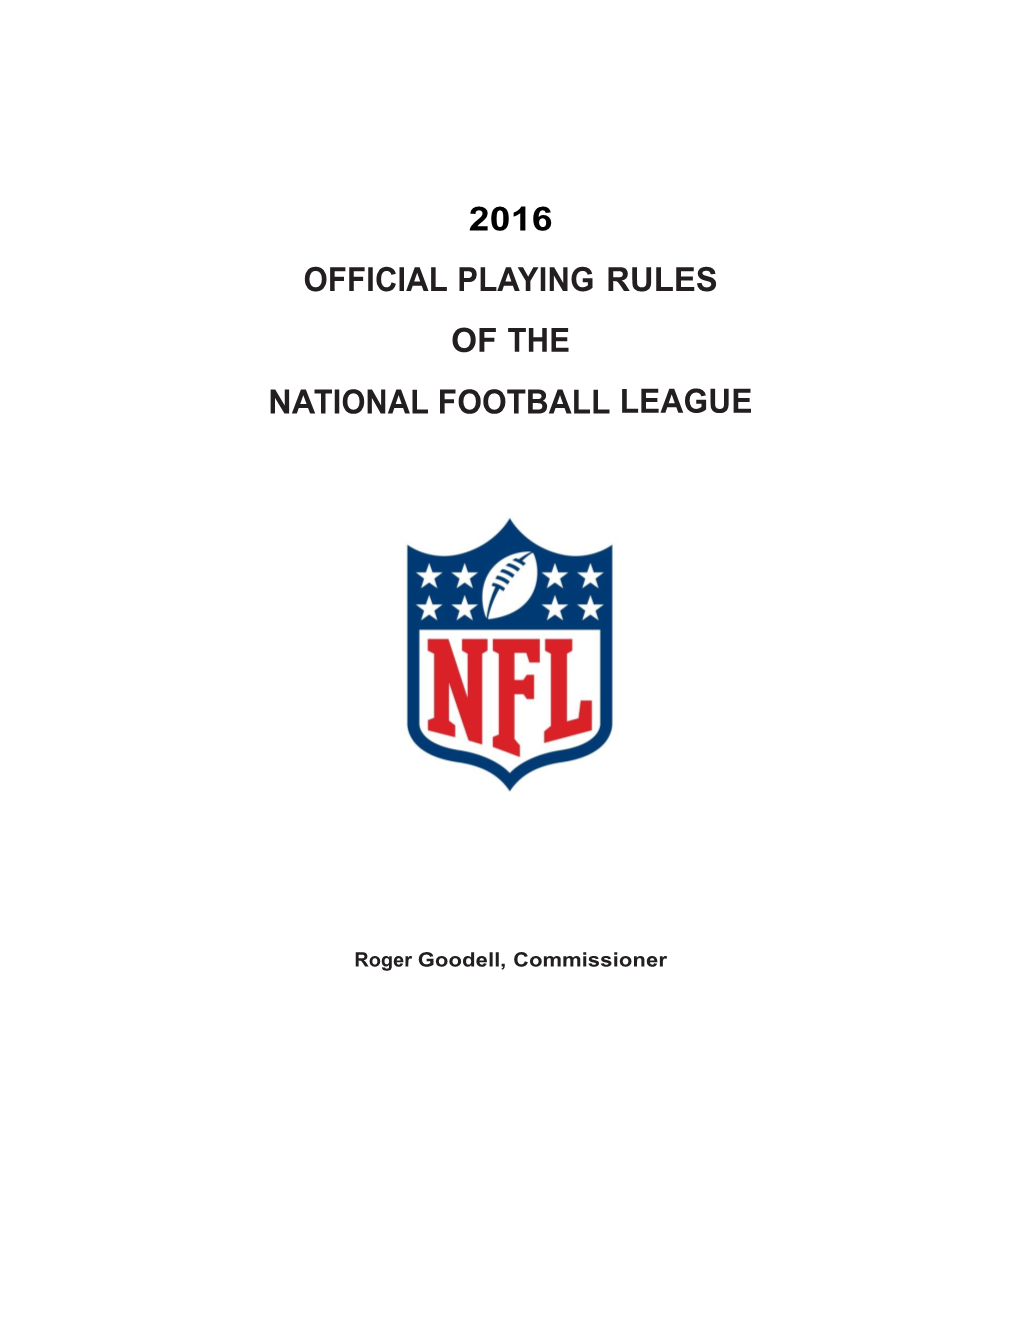 2016 Official Playing Rules of the National Football League